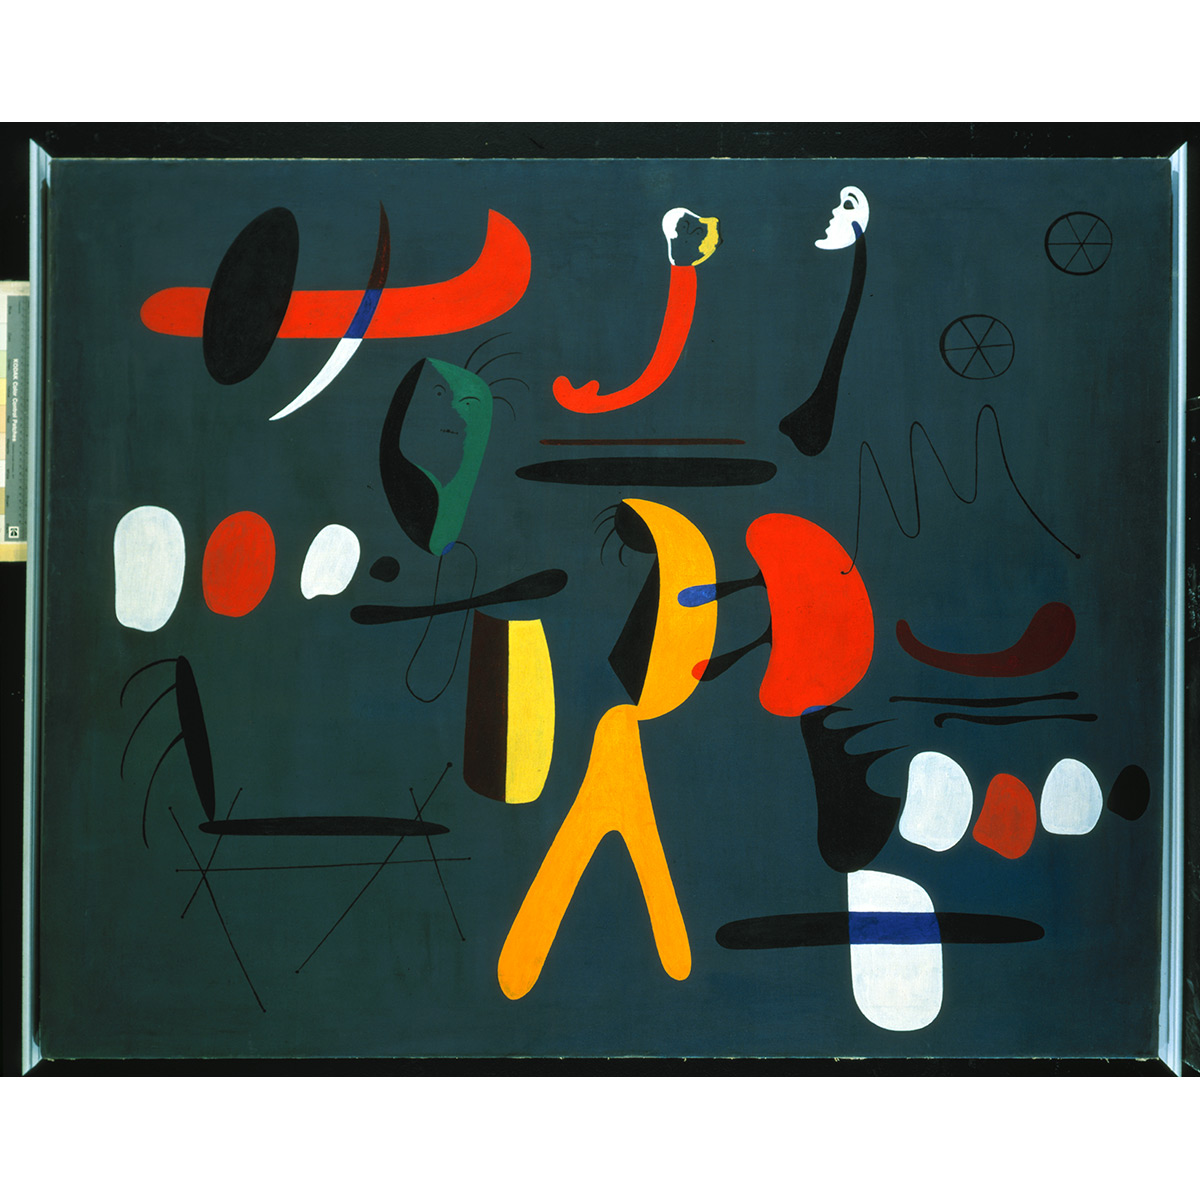 The HKJC Series: Joan Miró - The Poetry of Everyday Life - With You - The  Hong Kong Jockey Club